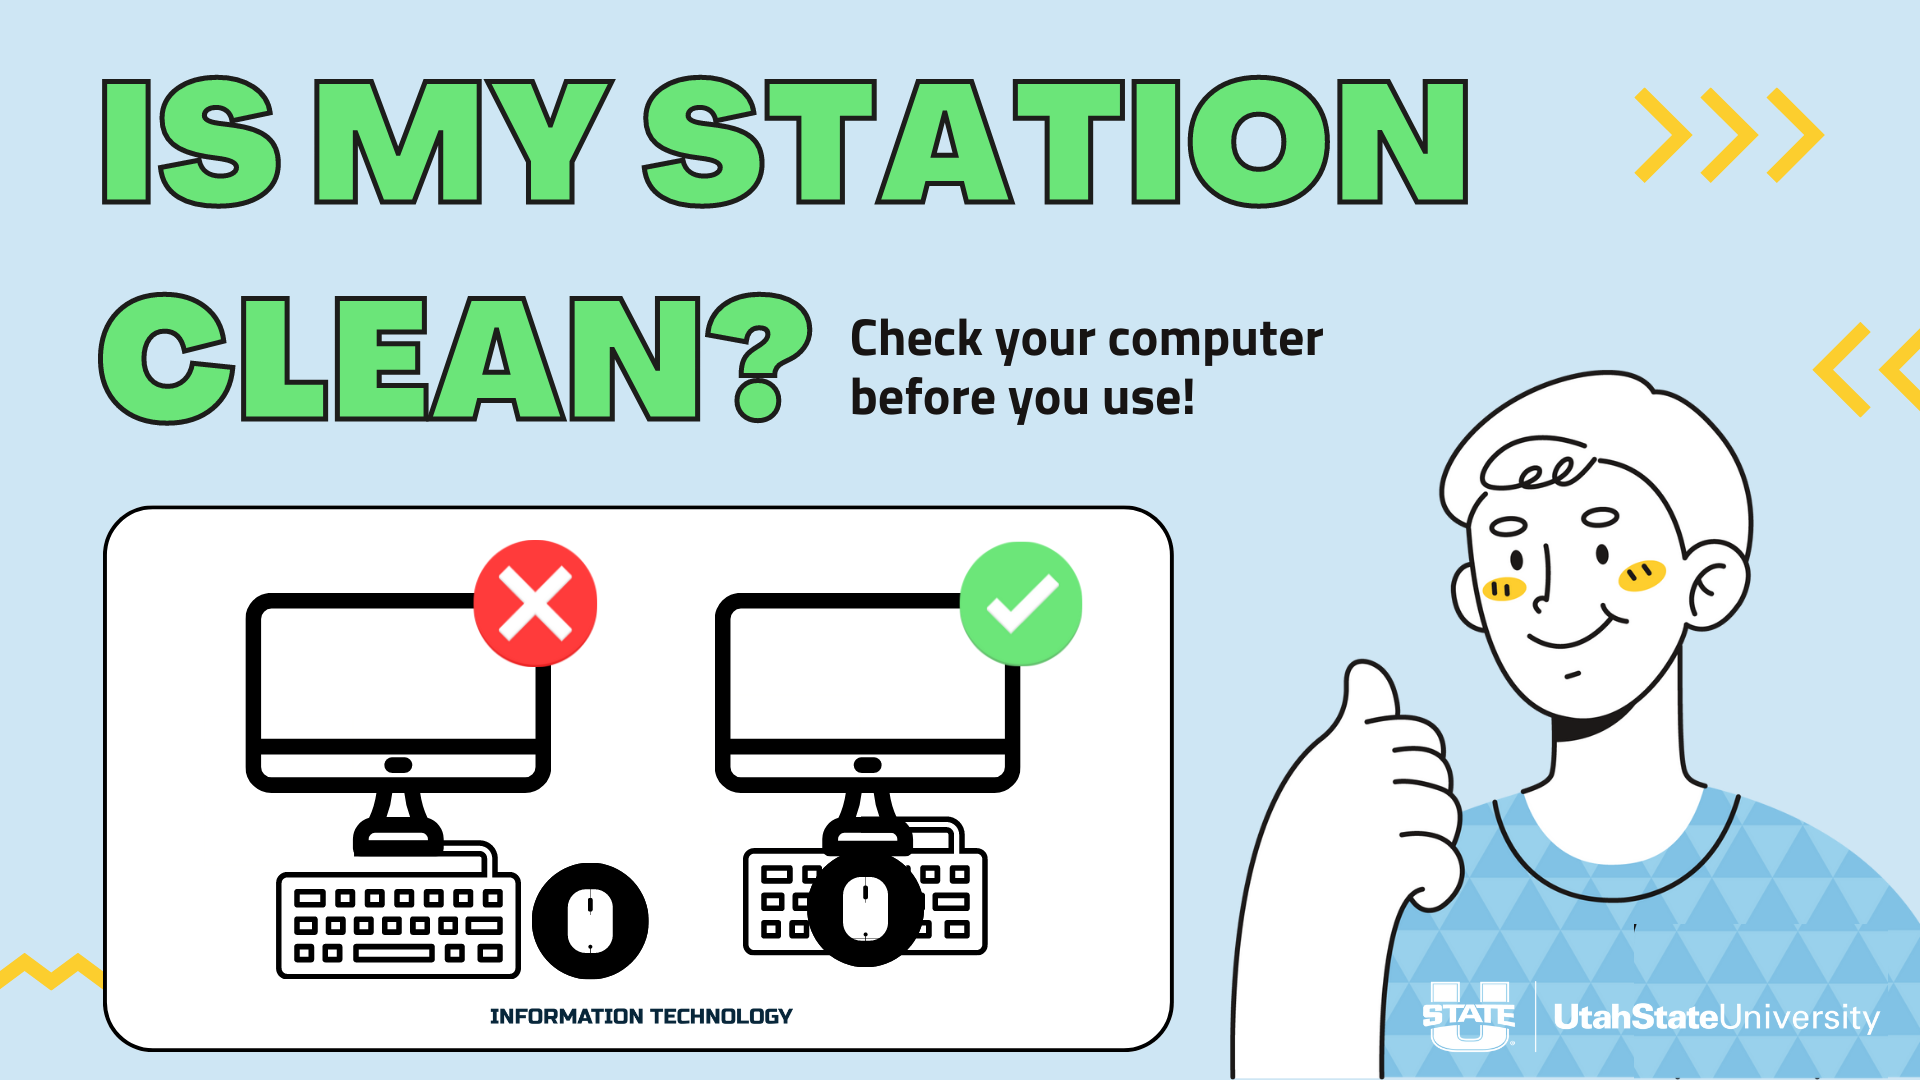 Text Reads: Is My Station Clean?